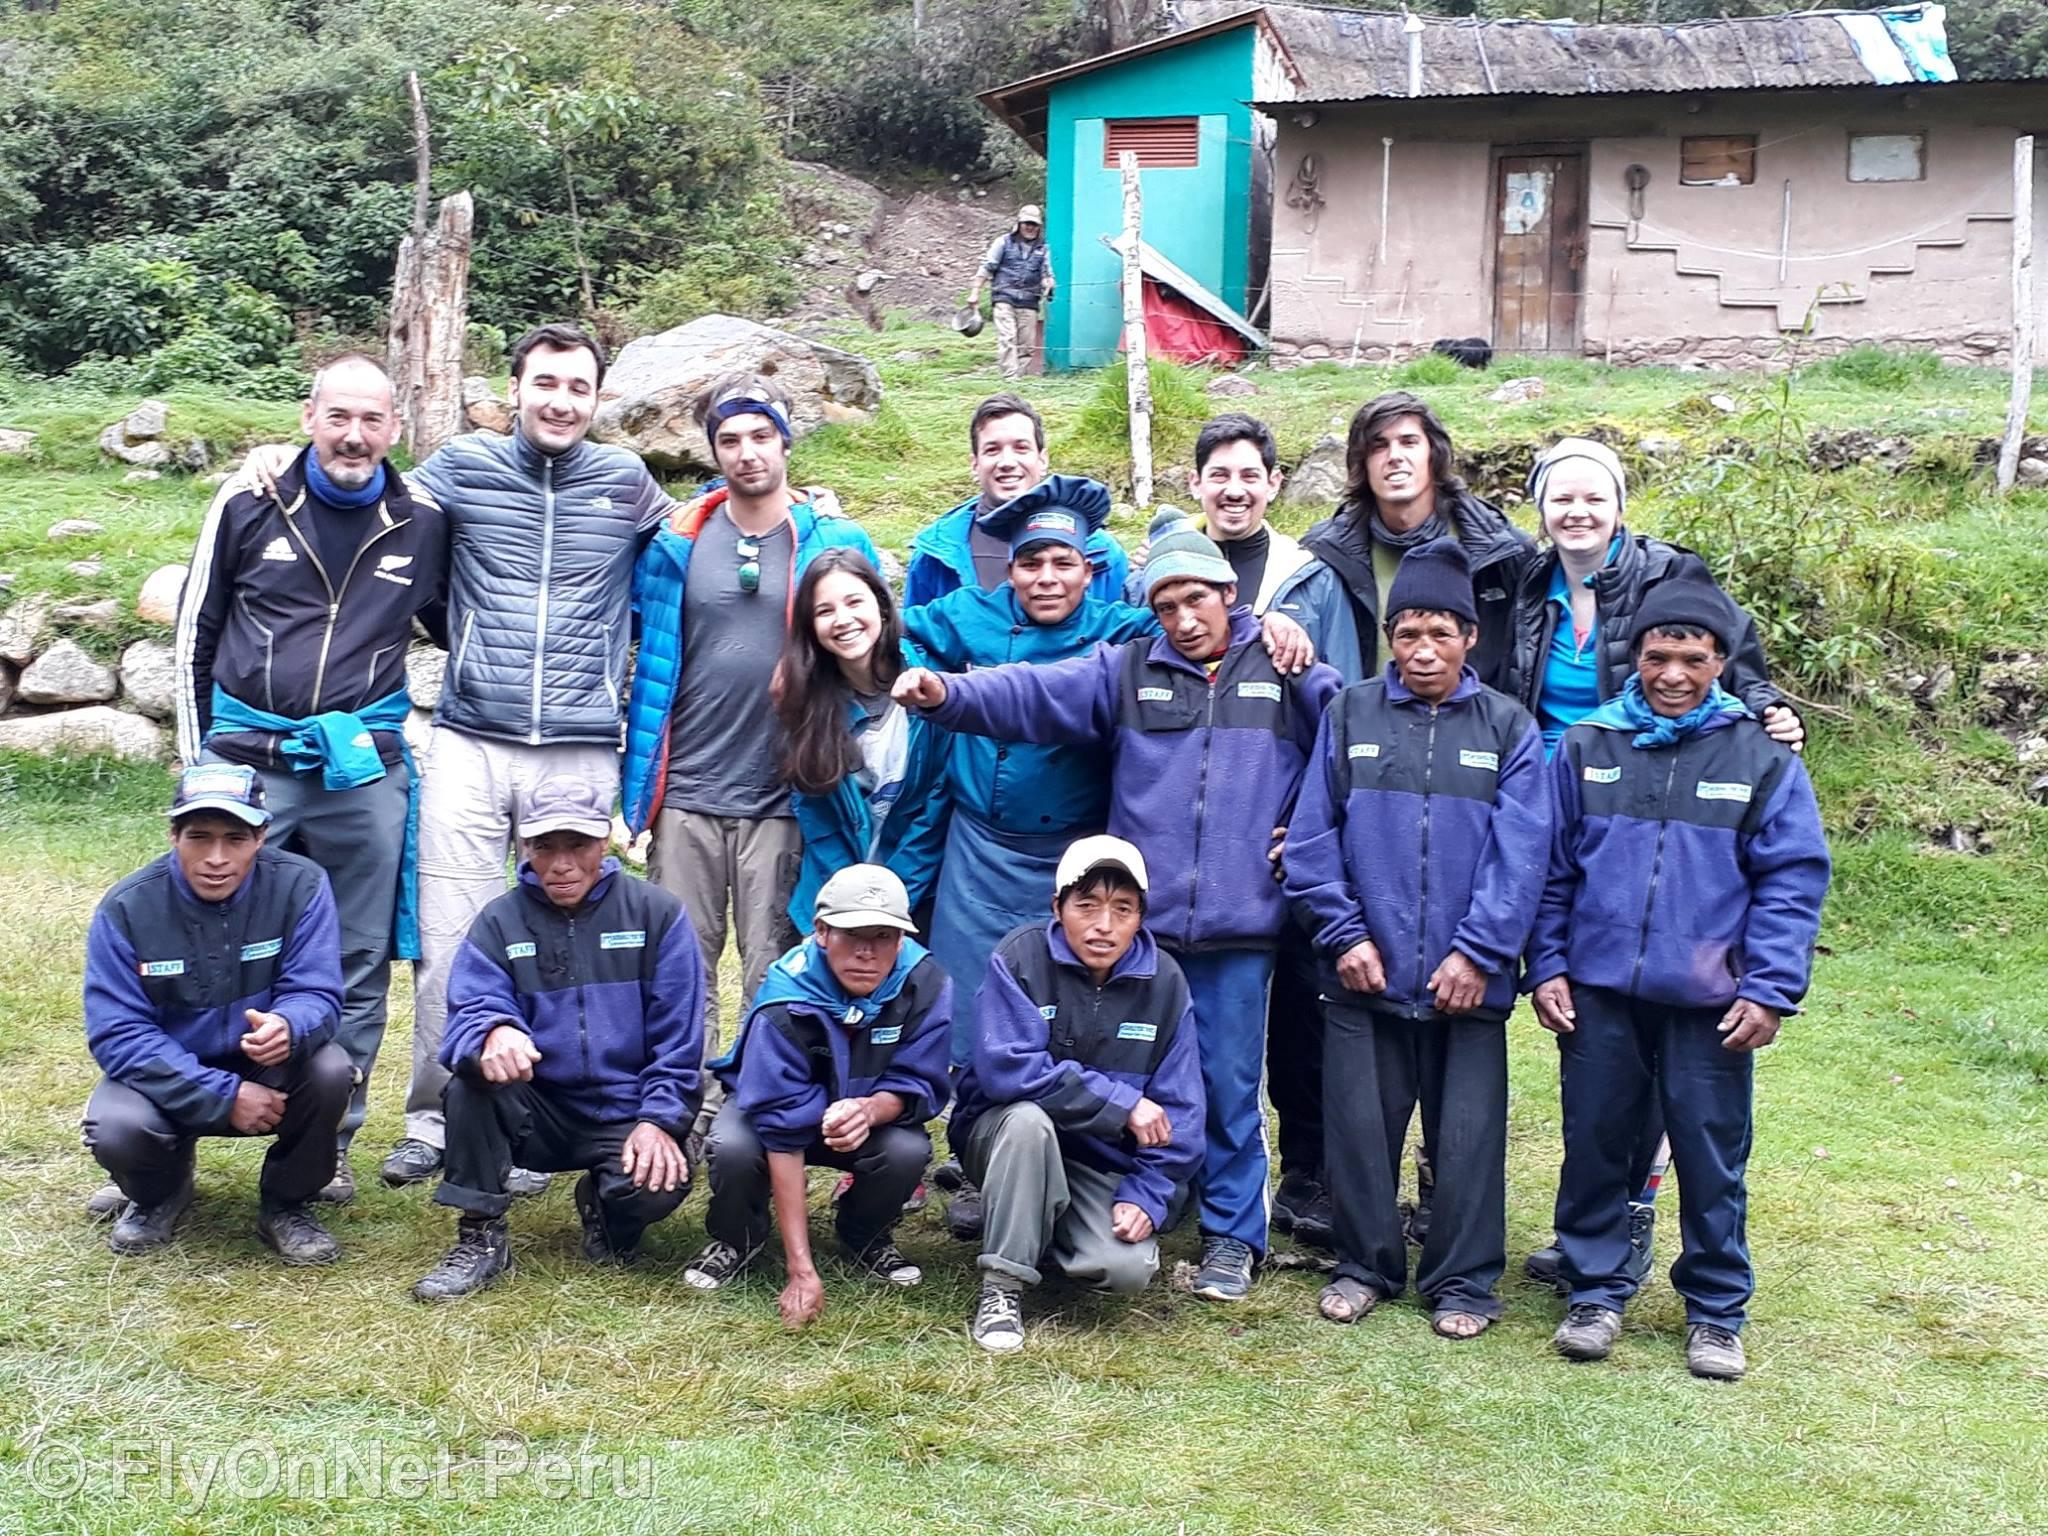 Photo Album: Our group of trekkers